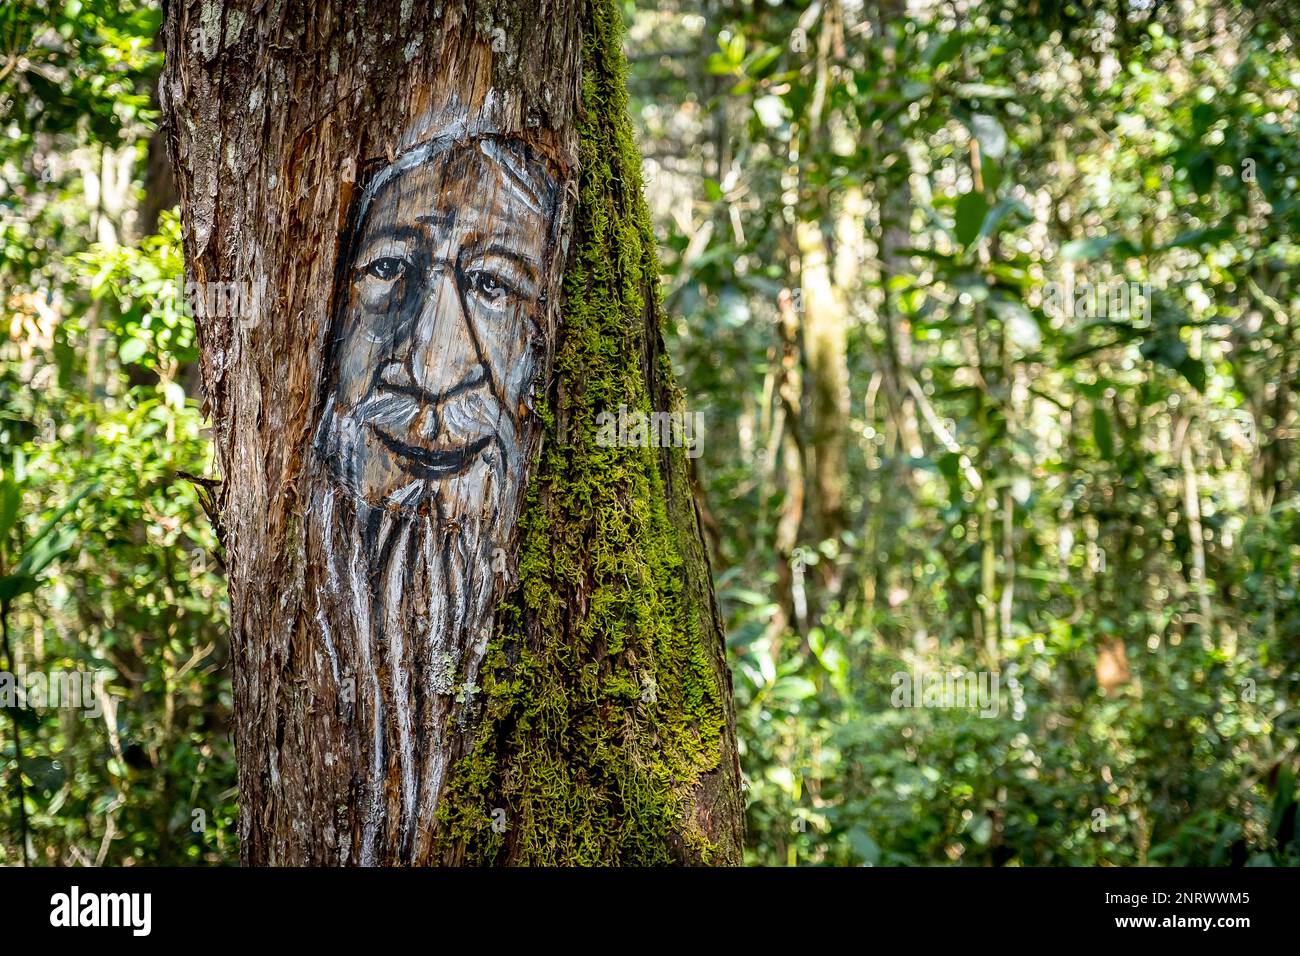 Mohan god, protector of the rivers and thief of women, myths and legends trail, Arví Park, Medellin, Colombia Stock Photo